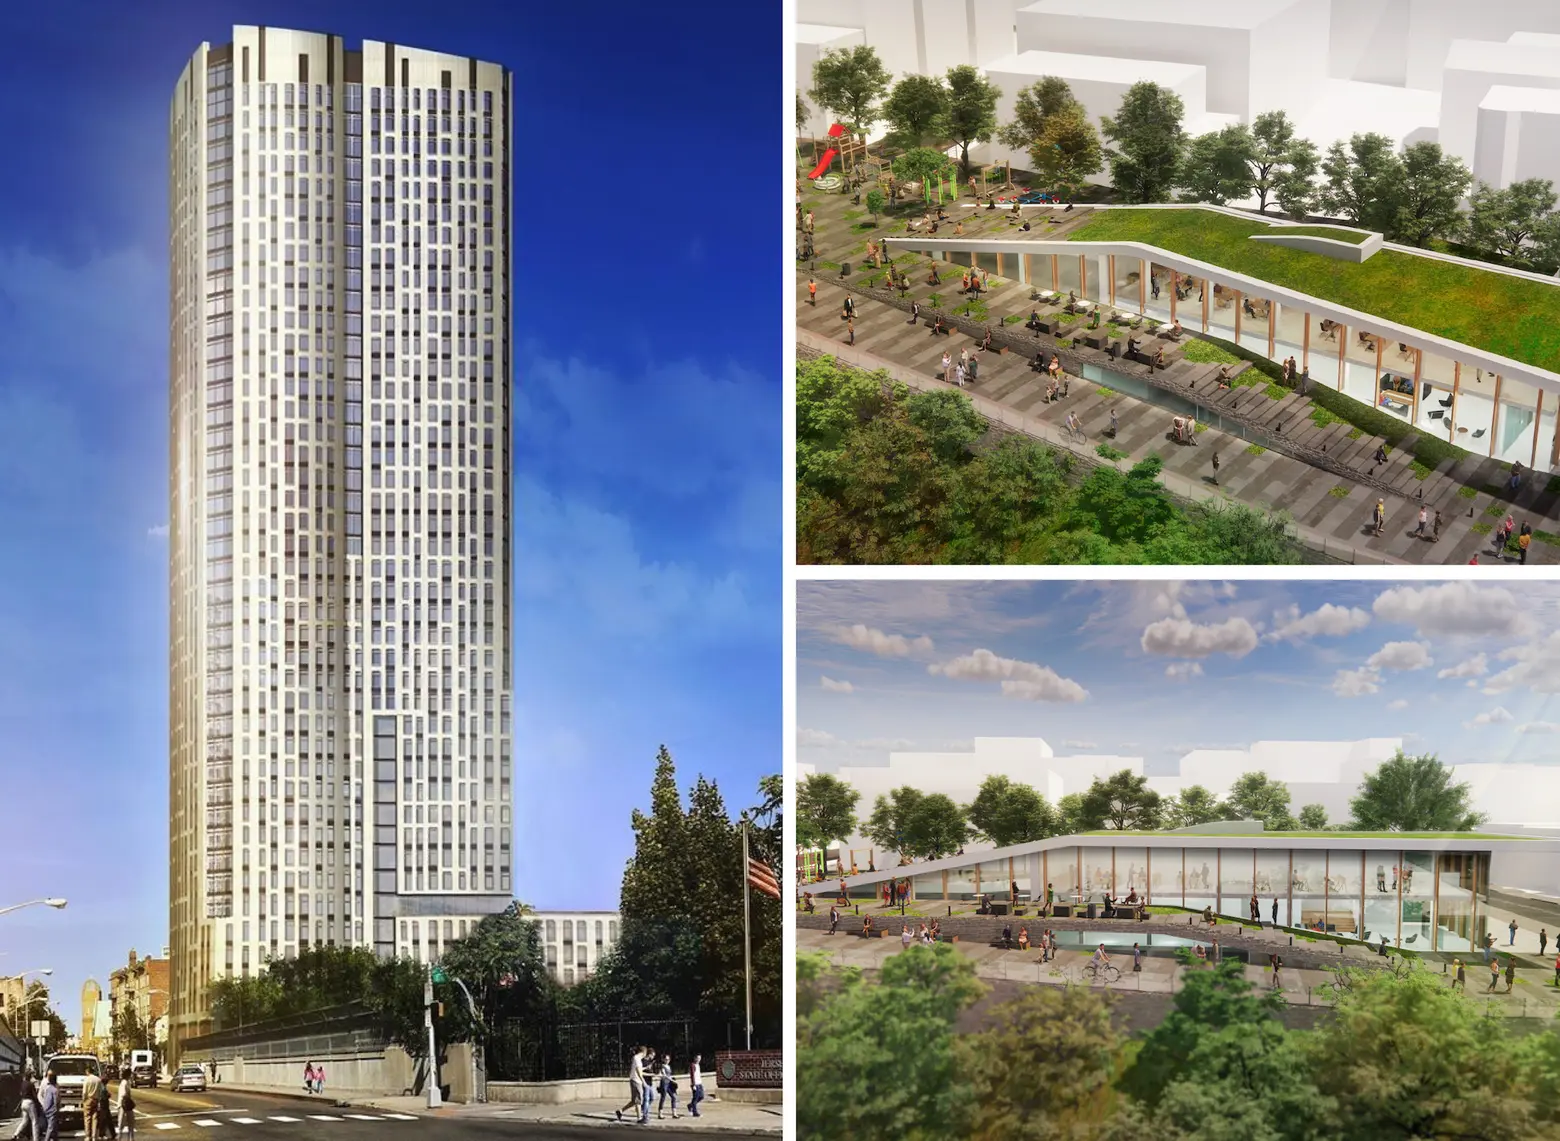 42-story Jersey City tower will have public park, community center, and 900 rental units